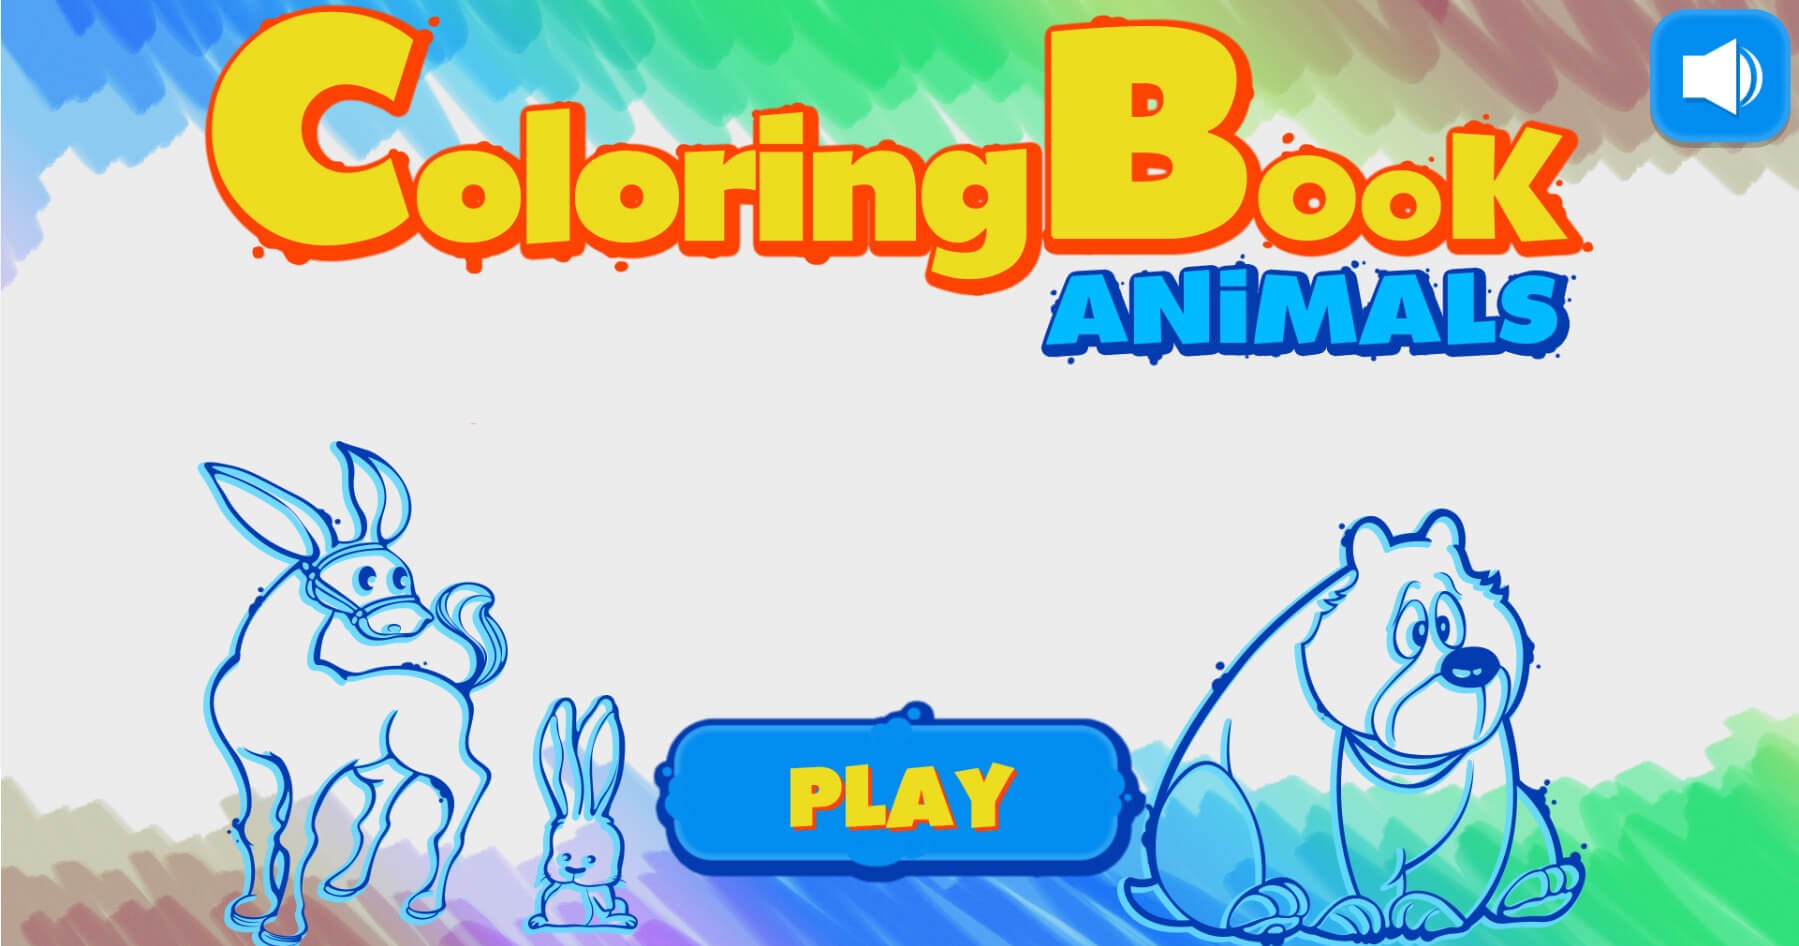 Download Html5 Coloring Book Animals Html5 Game By Codethislab Codecanyon